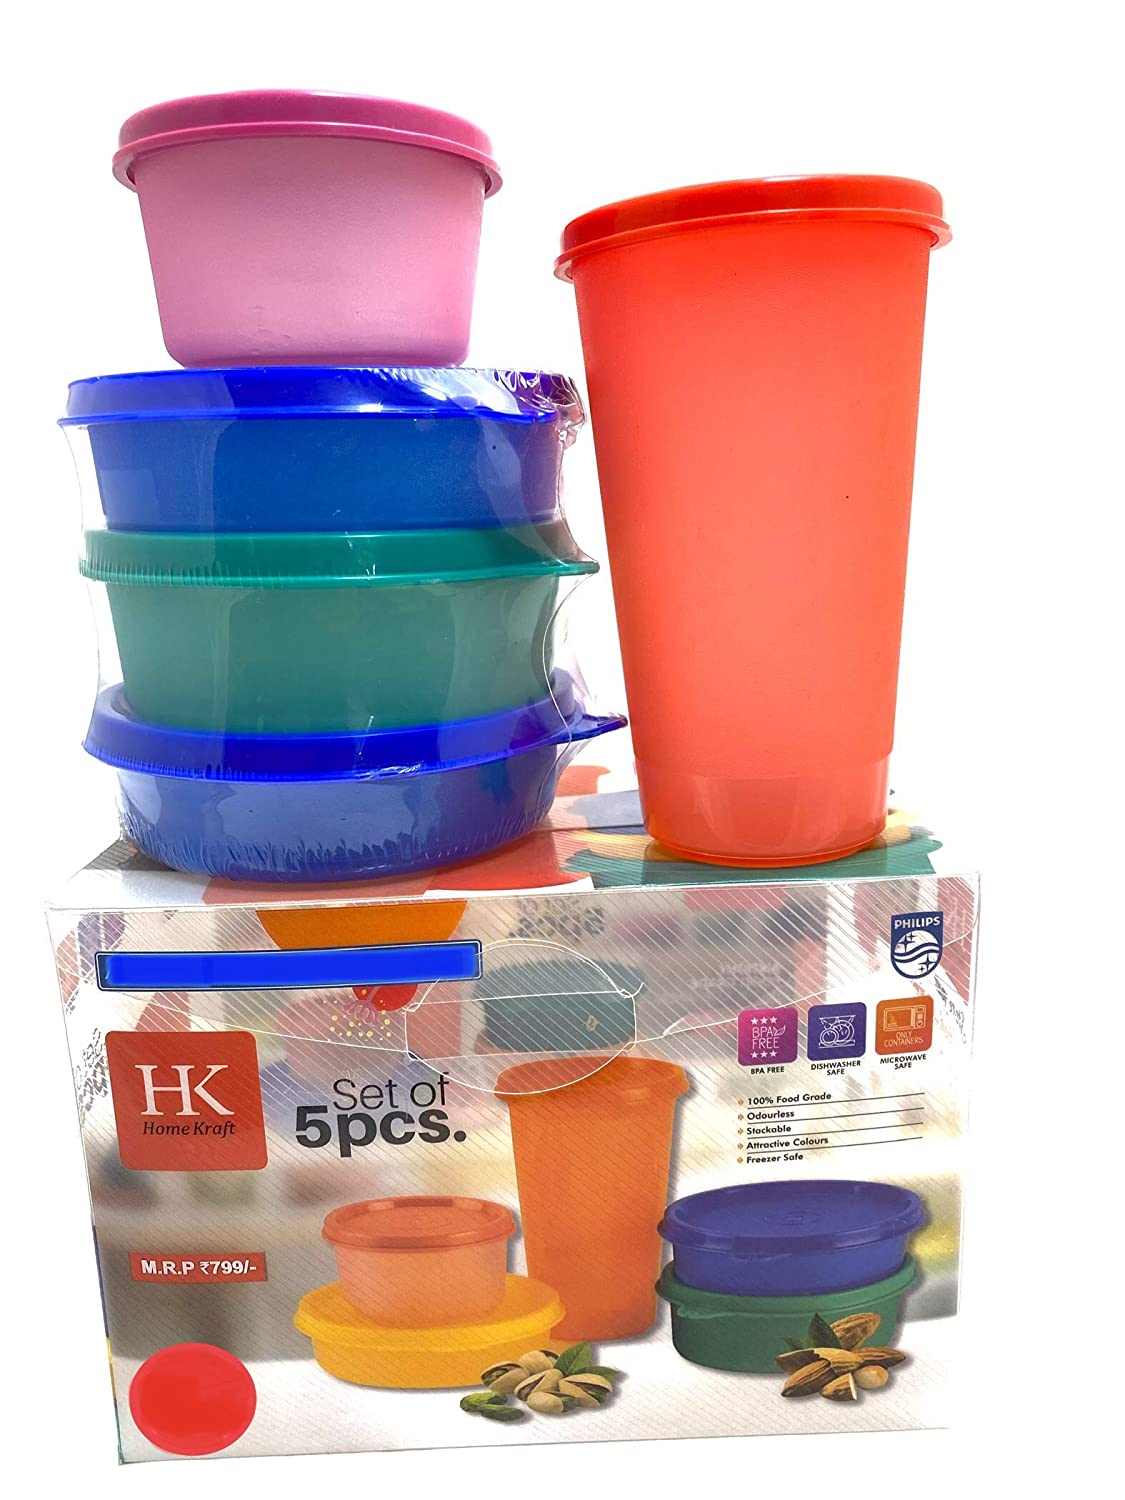 HK Home Craft 5 PC's AIR Tight Food Grade Container Set